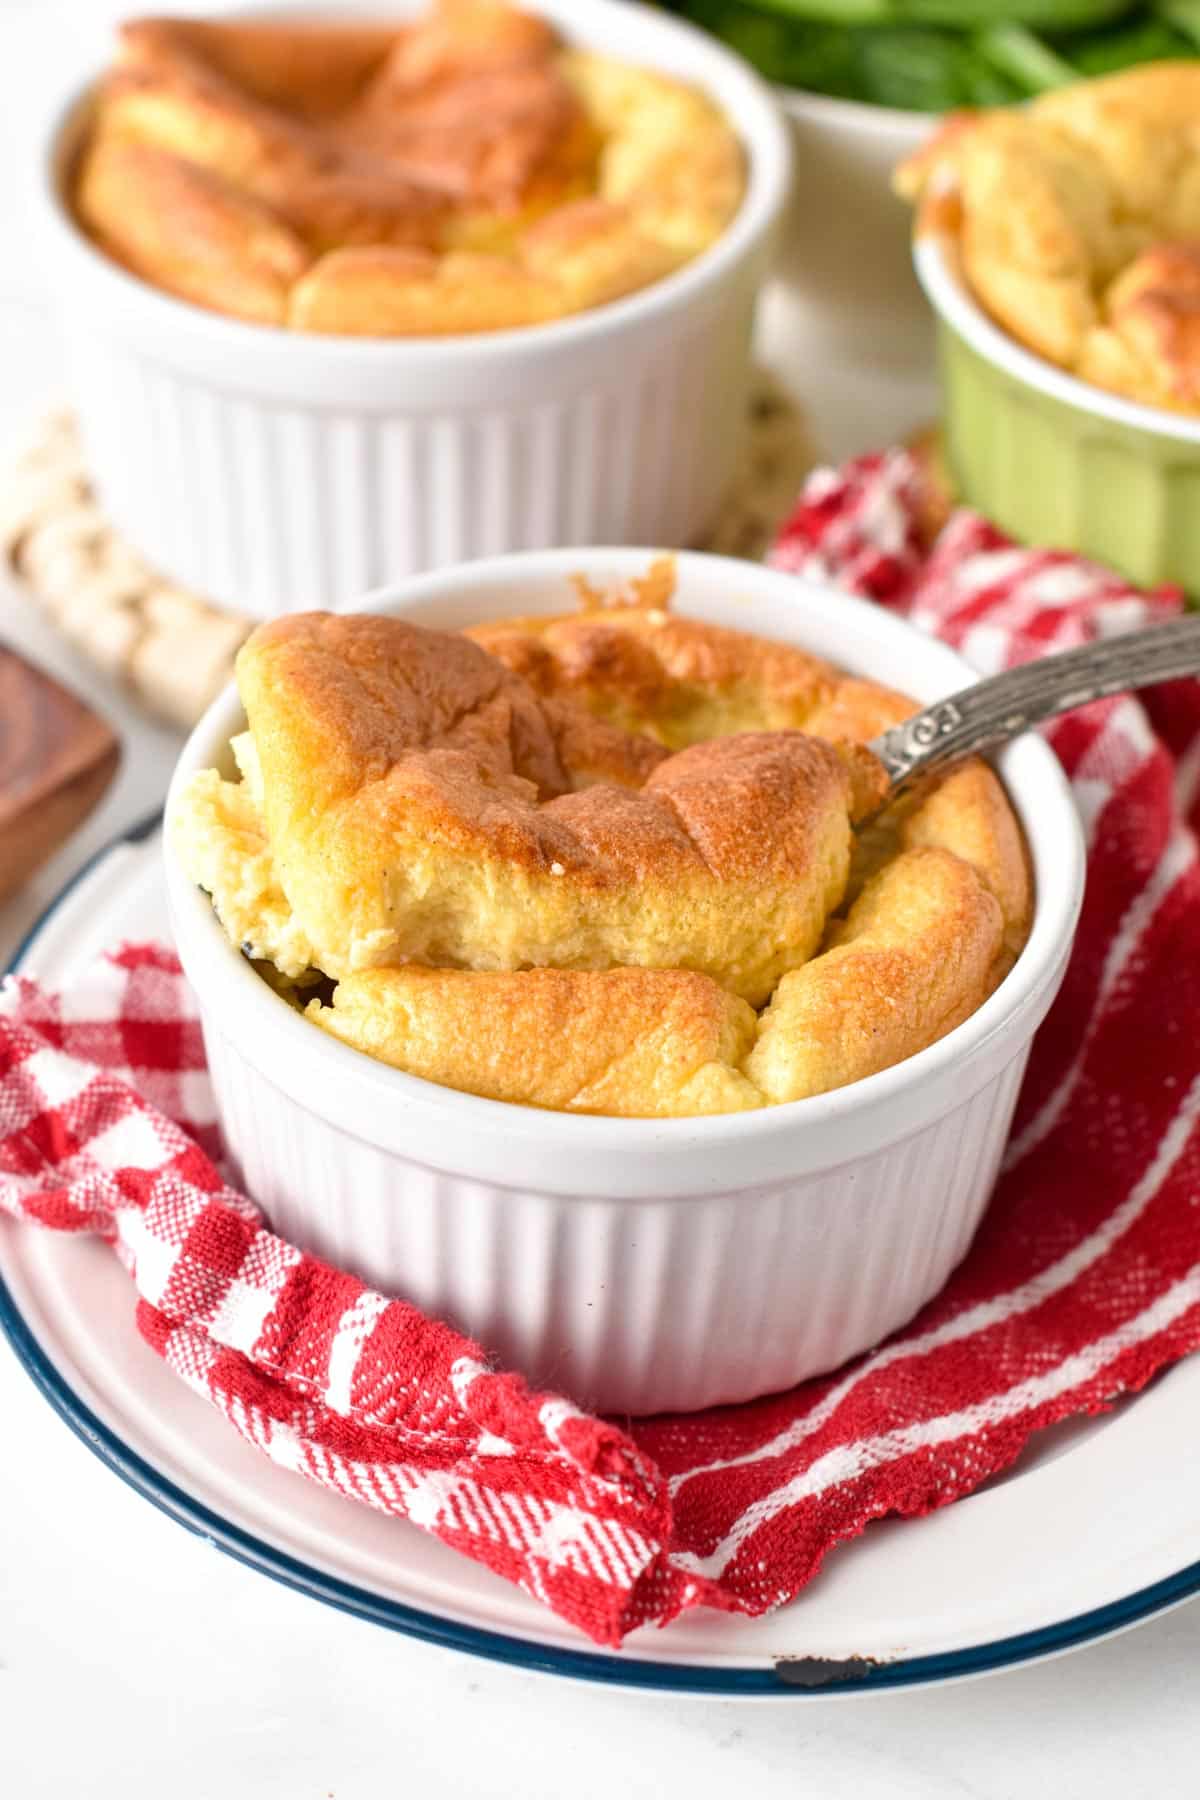 These Egg Souffles are fluffy eggs baked in single-serve ramekins with a fancy look perfect as a brunch recipe. Plus these egg souffles are ready in less than 30 minutes and are a great way to feed a breakfast crowd on the weekend with a fancy egg breakfast recipe.